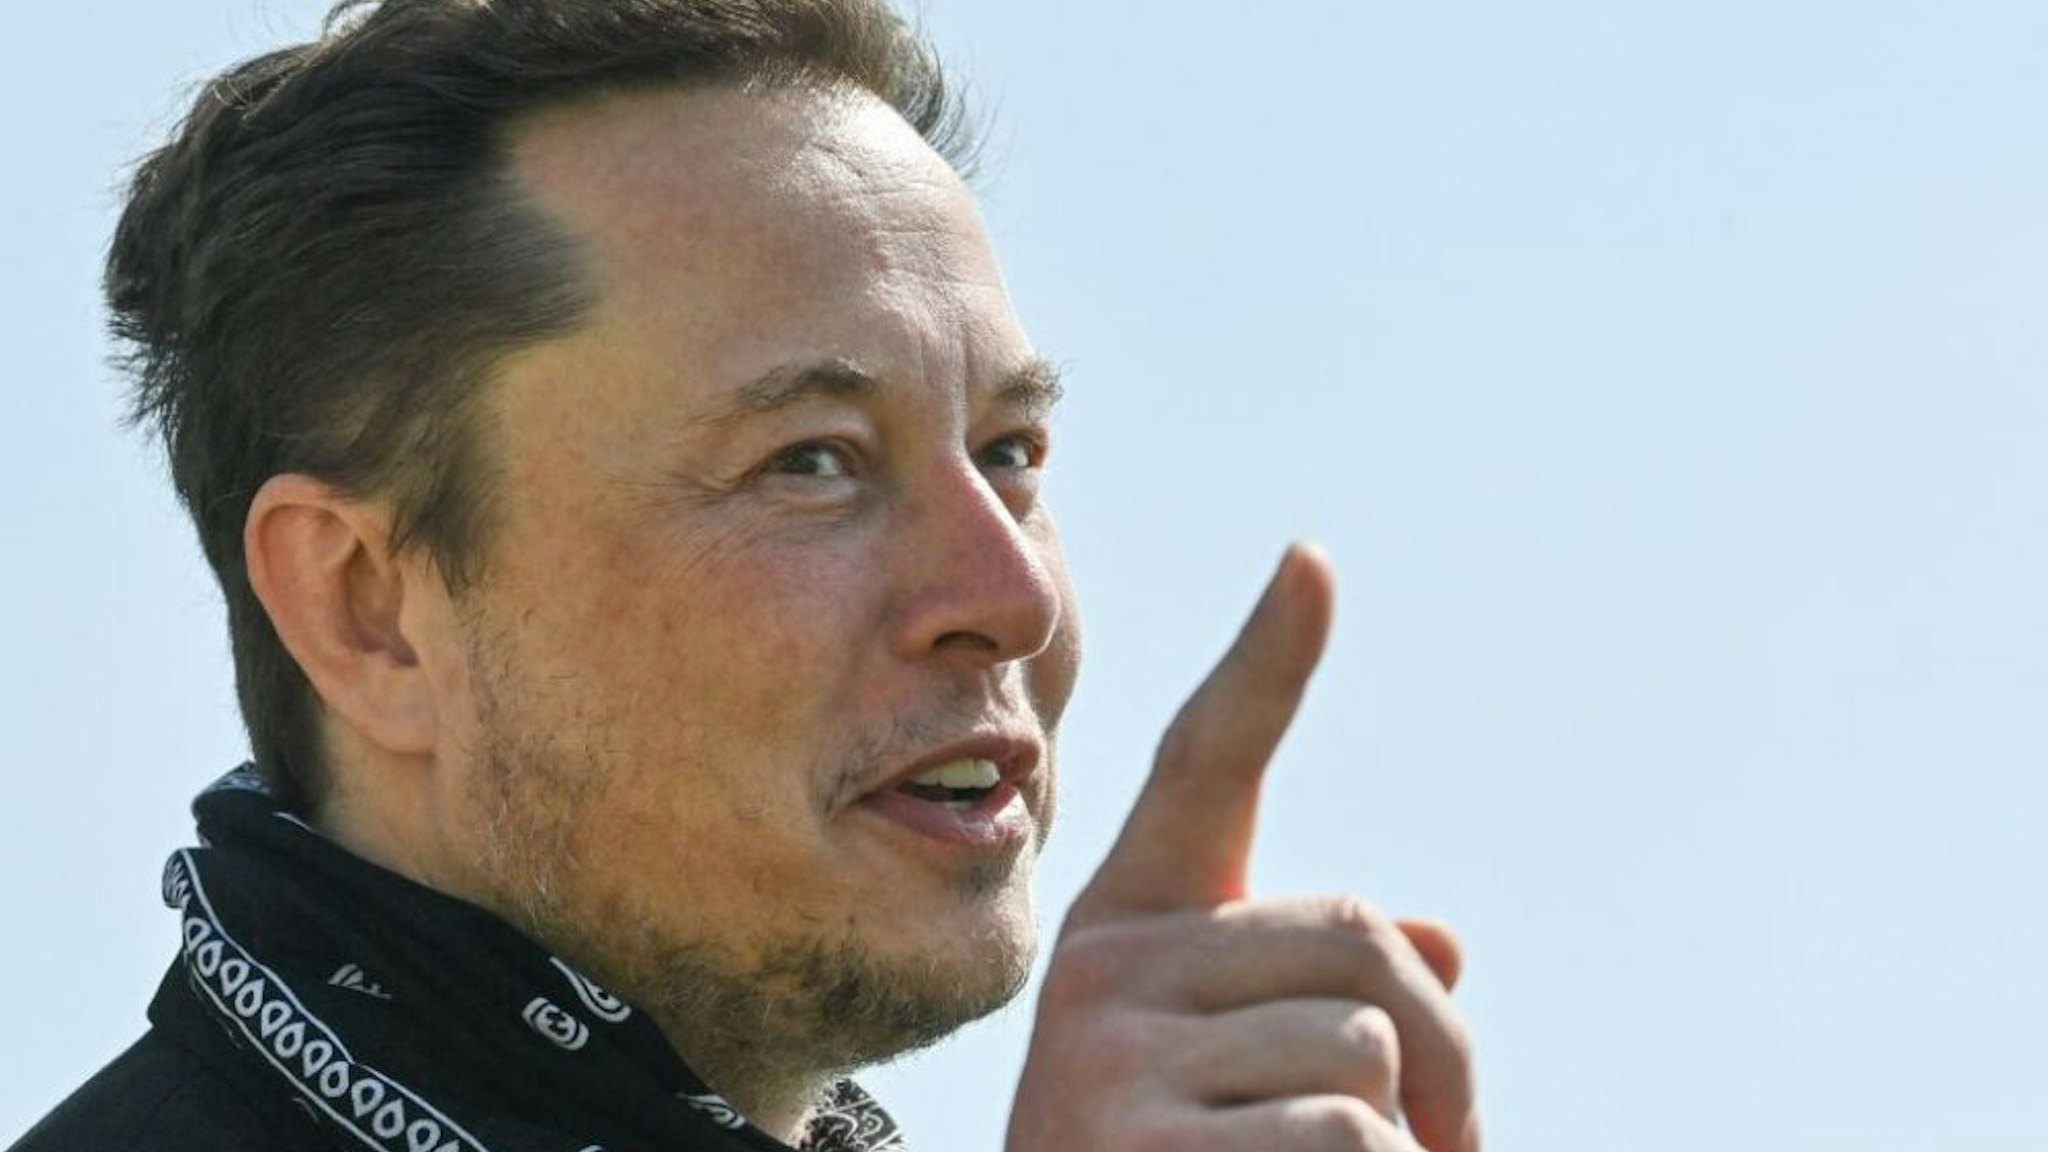 US entrepreneur and business magnate Elon Musk gestures during a visit at the Tesla Gigafactory plant under construction, on August 13, 2021 in Gruenheide near Berlin, eastern Germany.